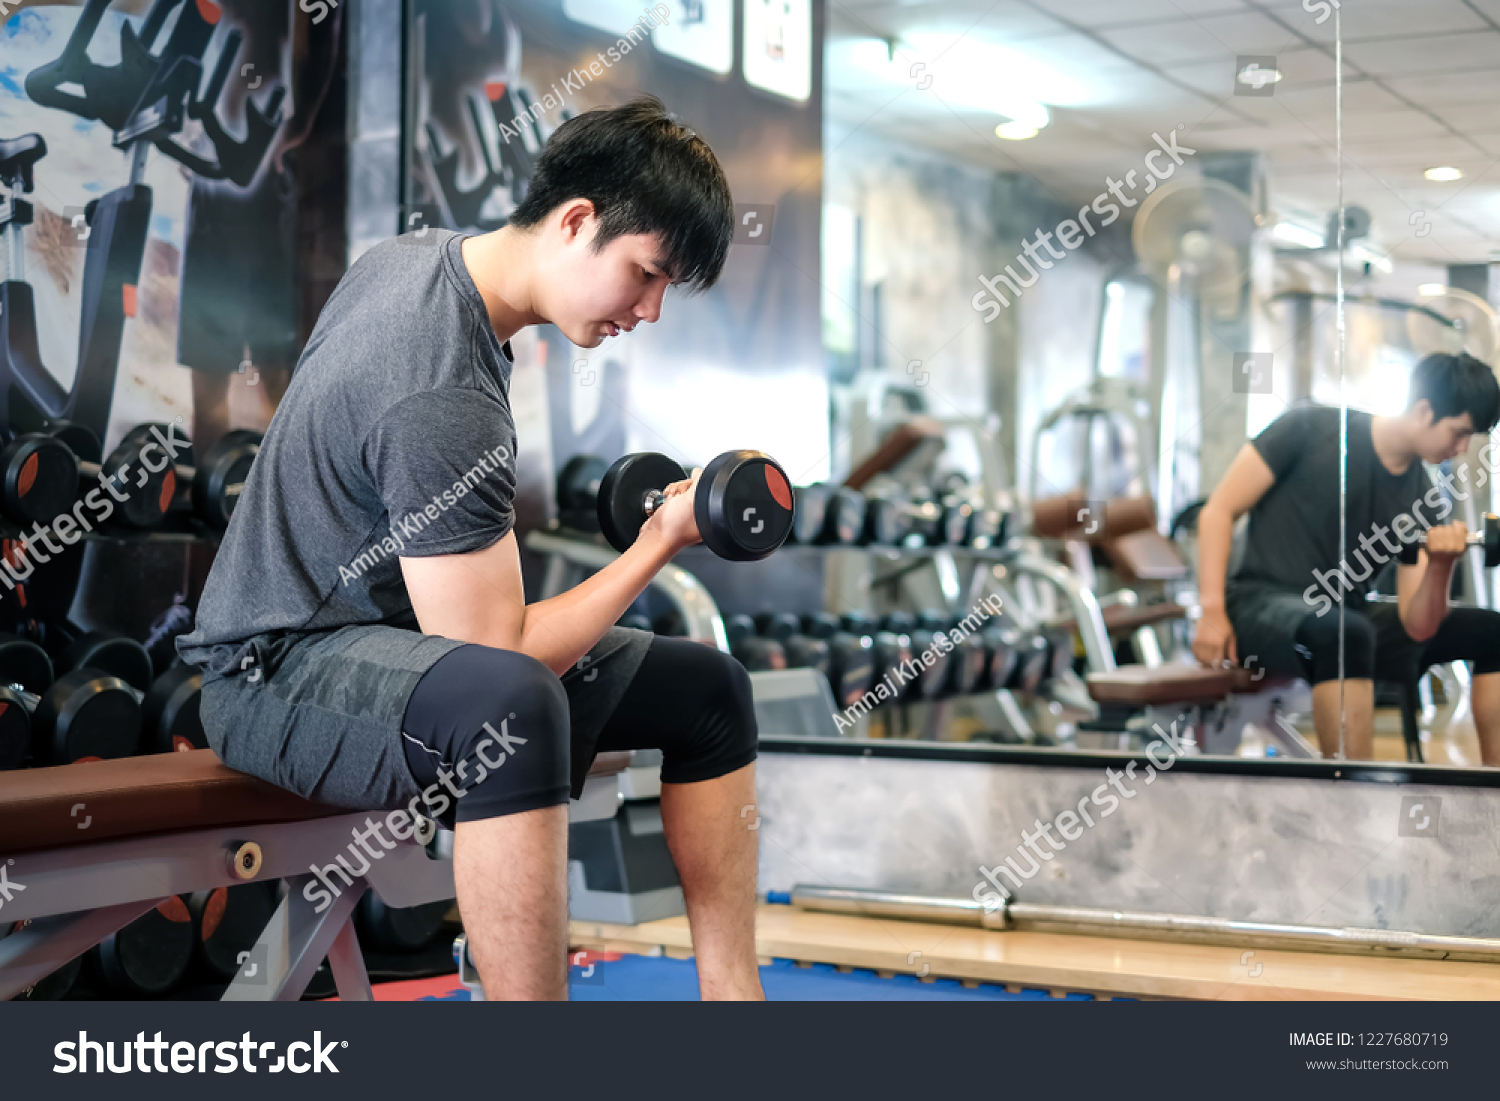 Asian man exercising using dumbbell in the gym. #1227680719